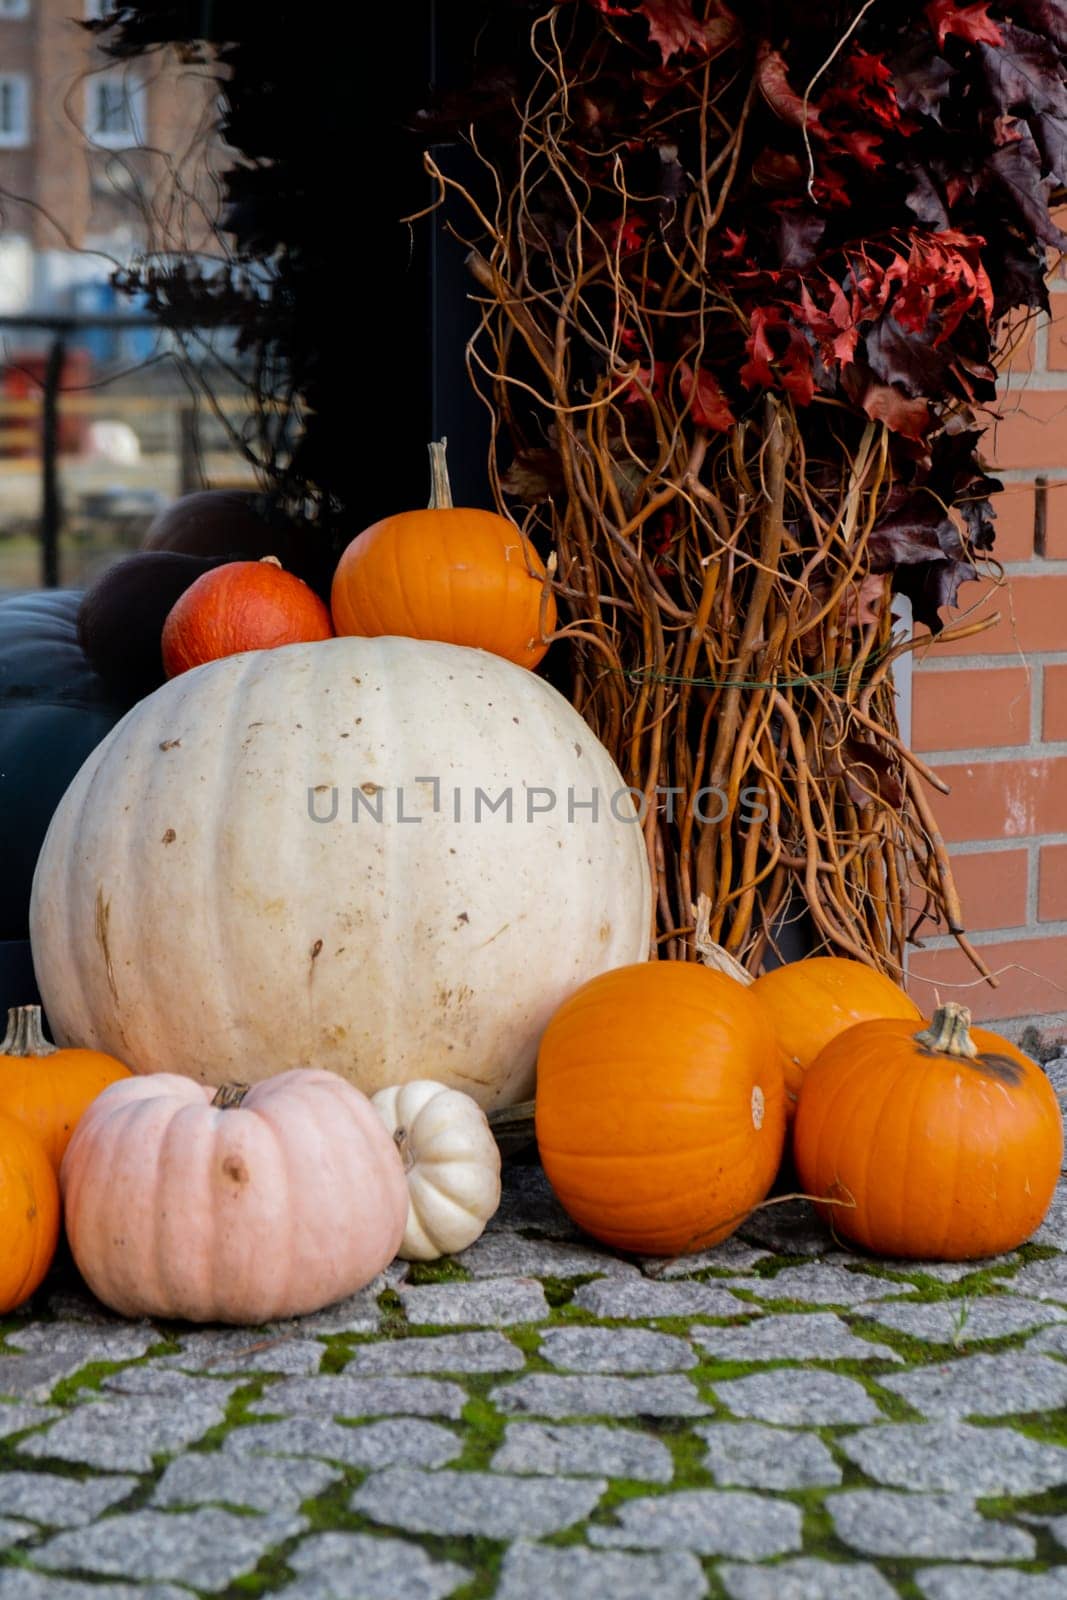 Exterior Beautiful cozy atmospheric halloween pumpkins decorated on porch. Autumn leaves and fall flowers celebration holiday Thanksgiving October season outdoors in city